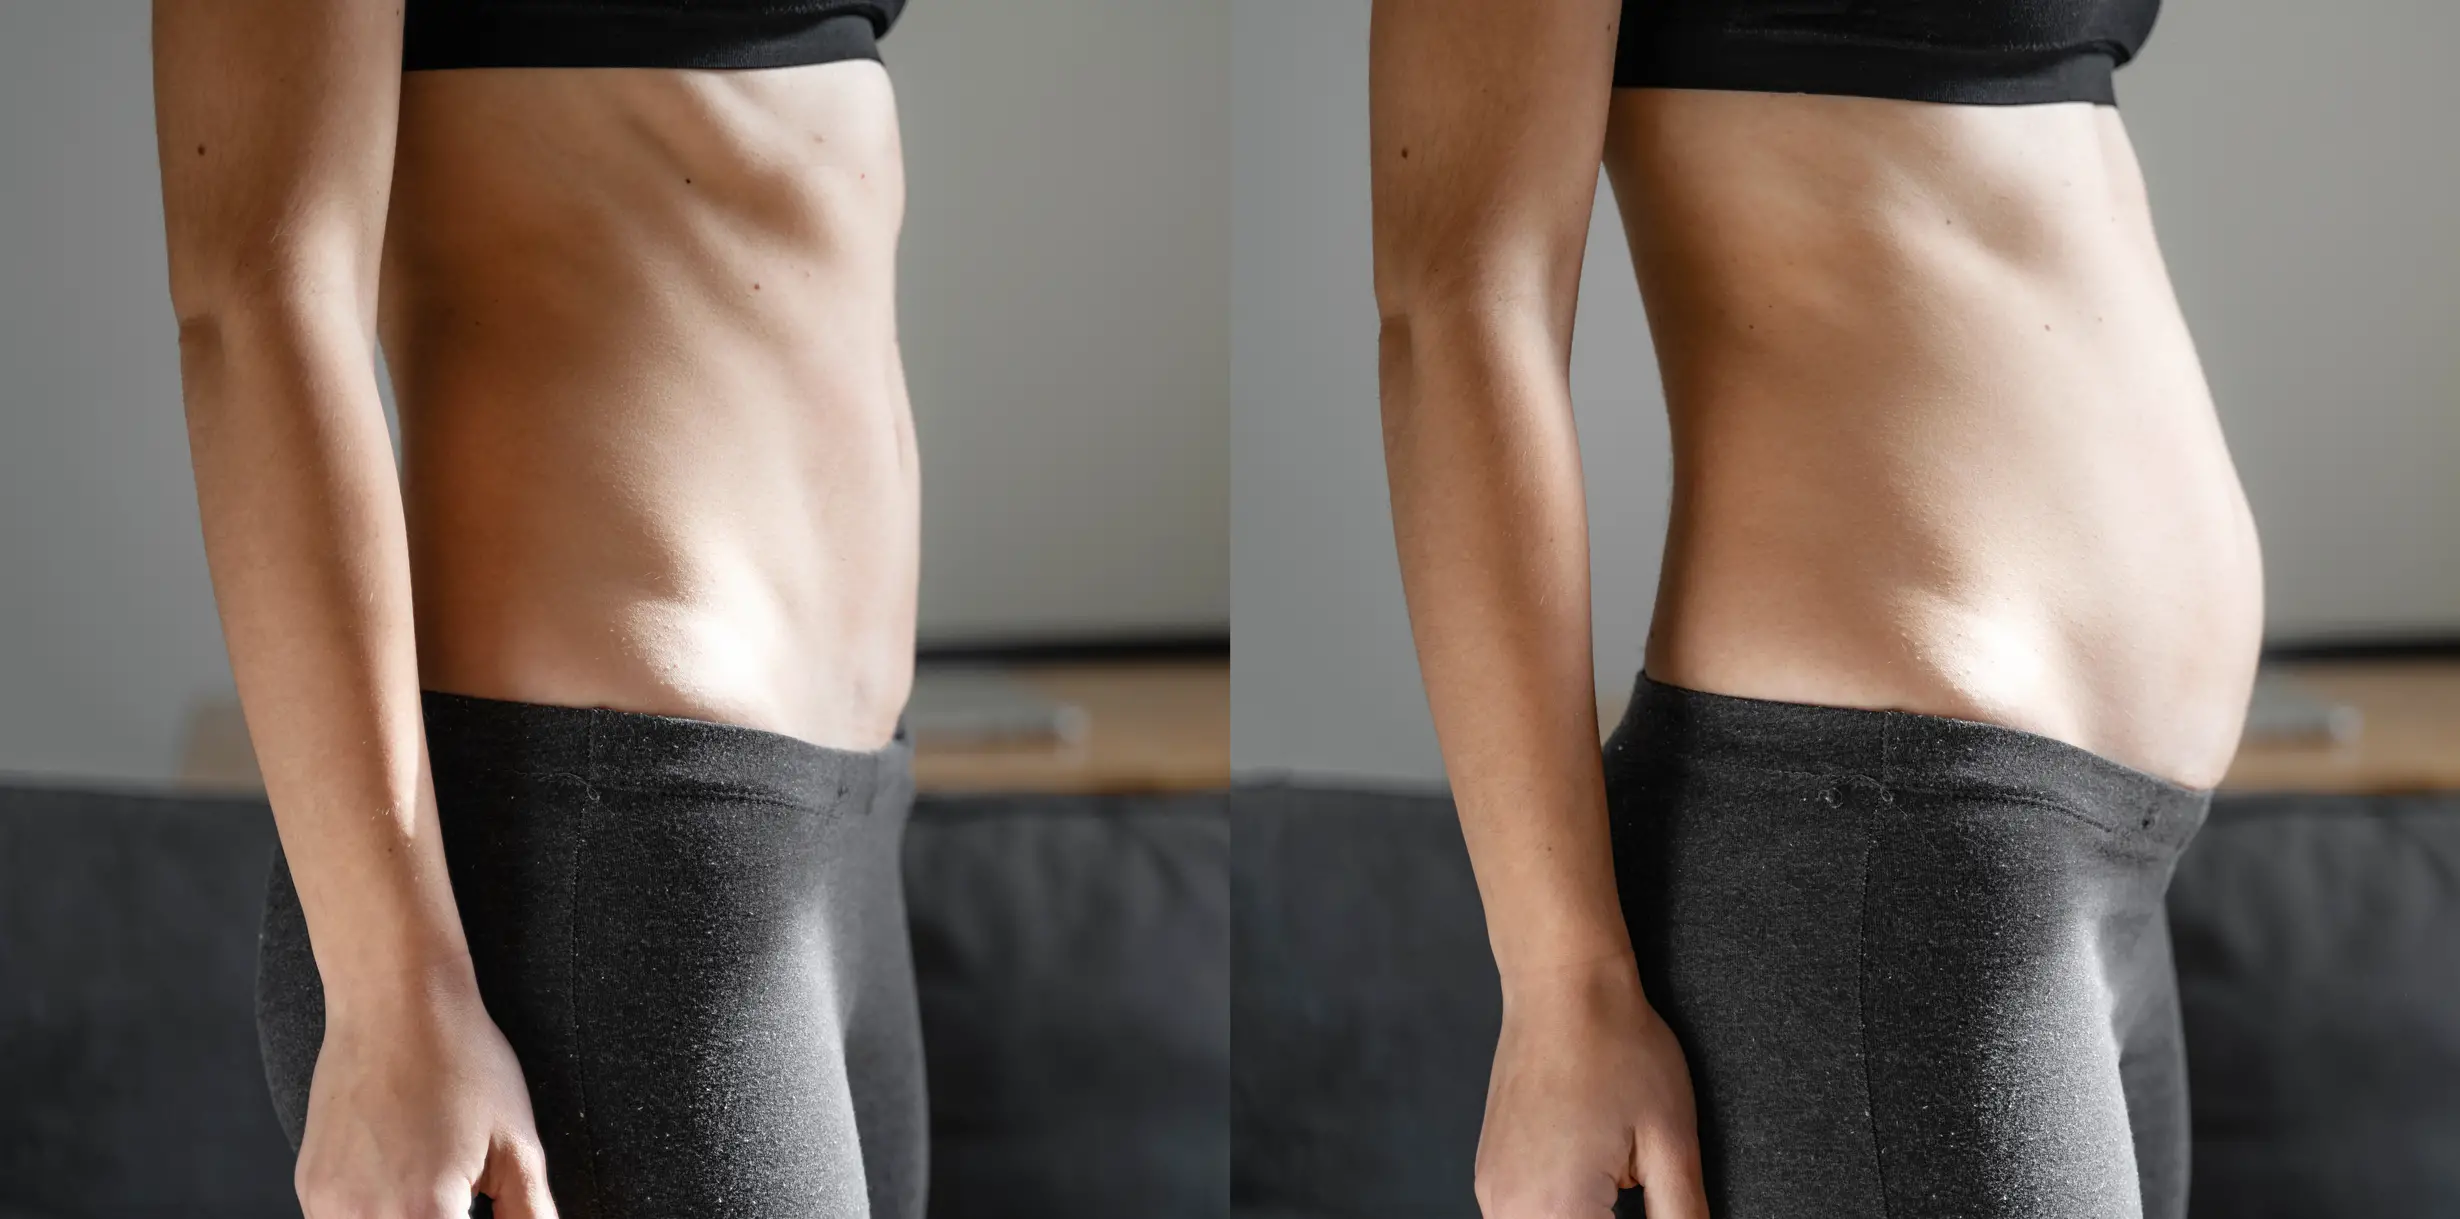 Before and after young woman side view of body showing Diastasis recti